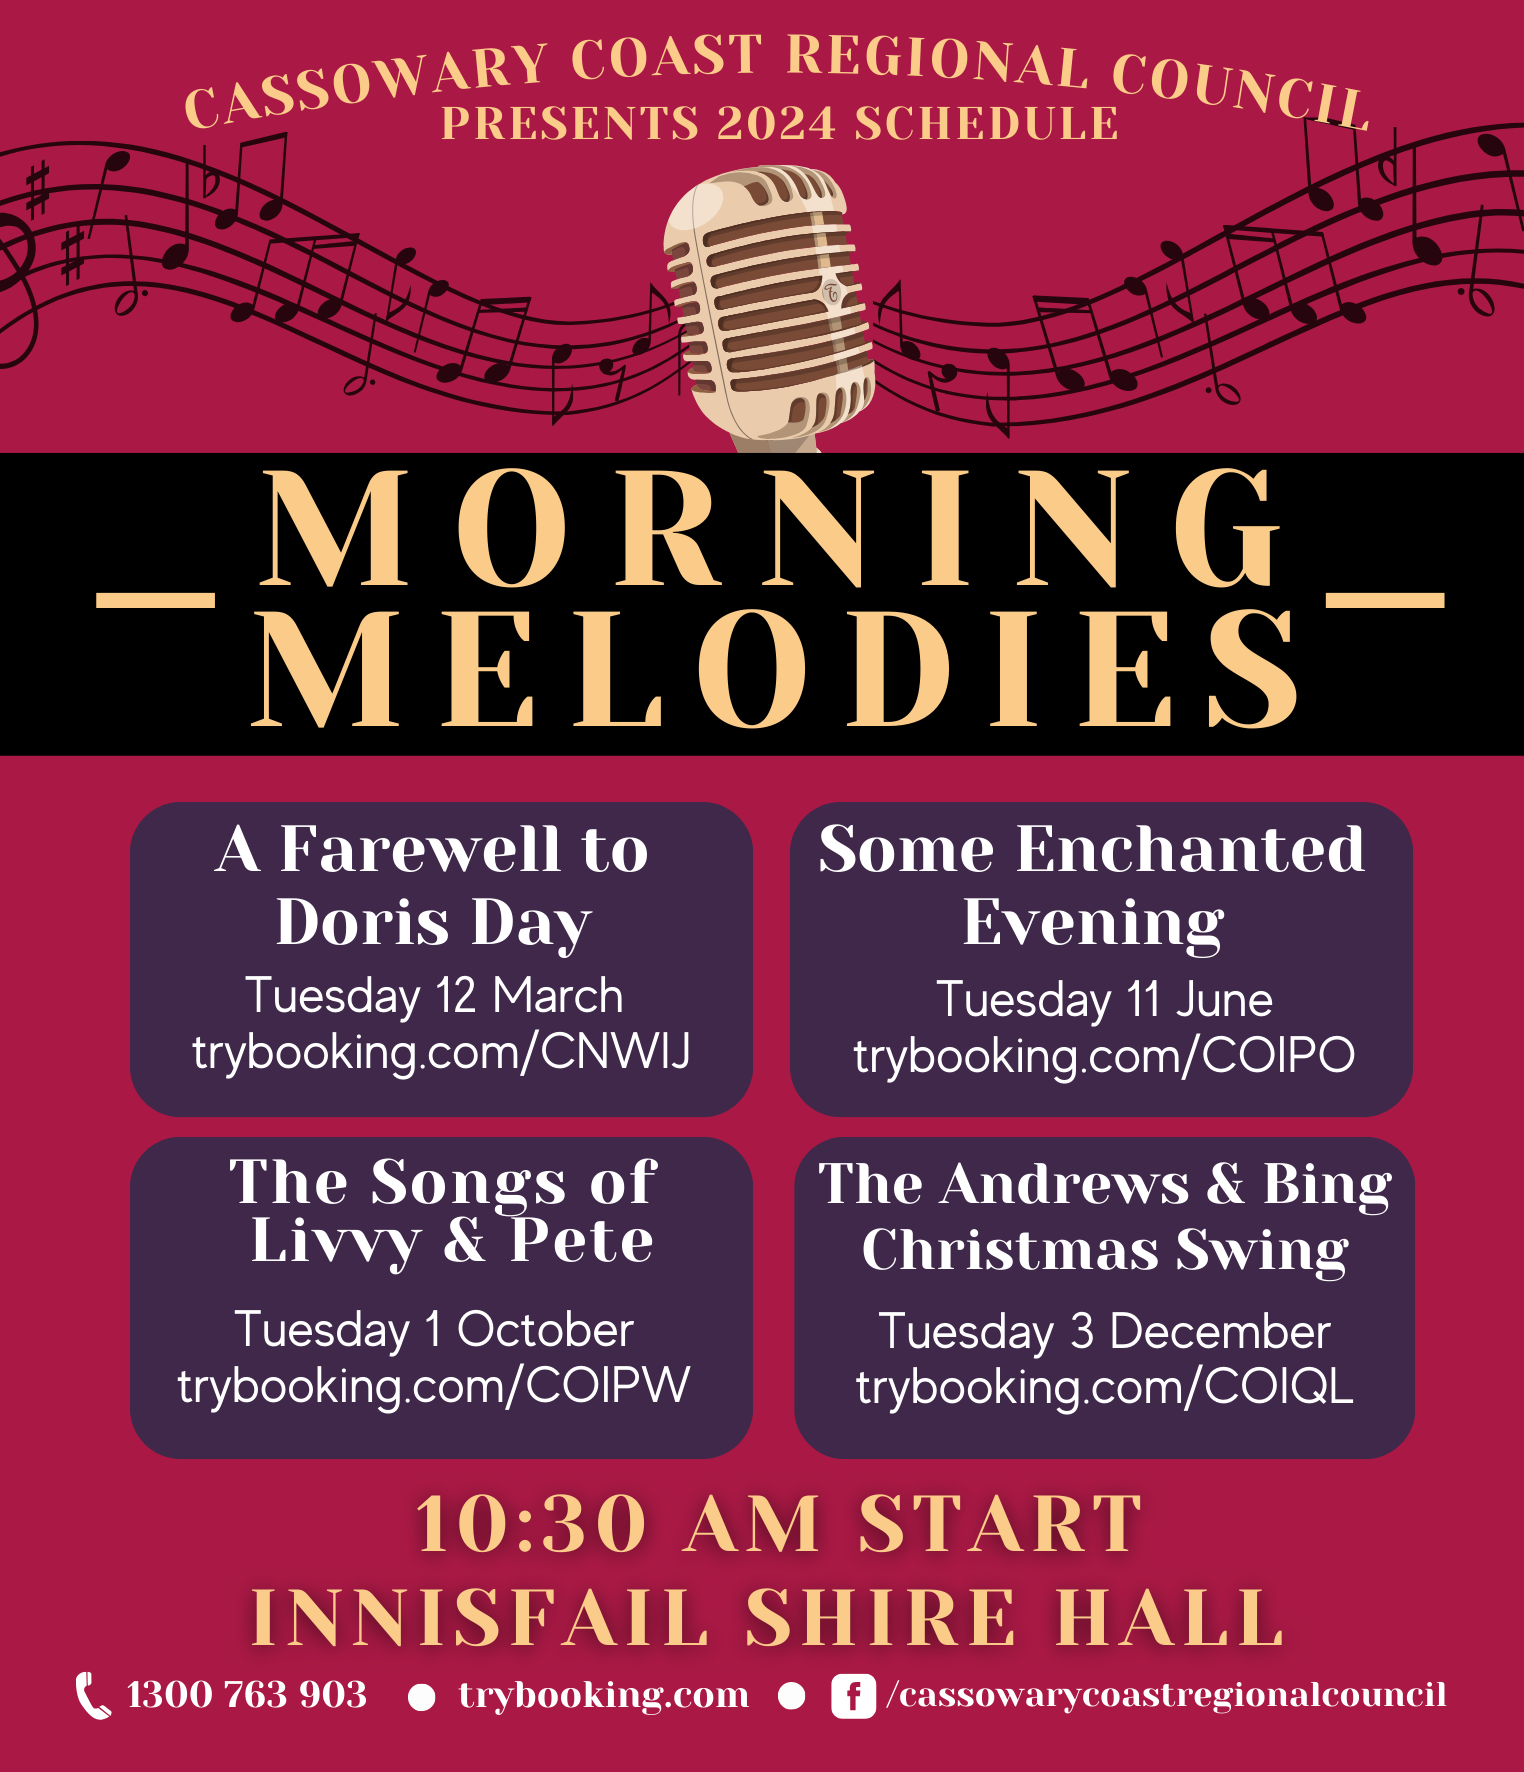 Morning melodies 2024 event schedule